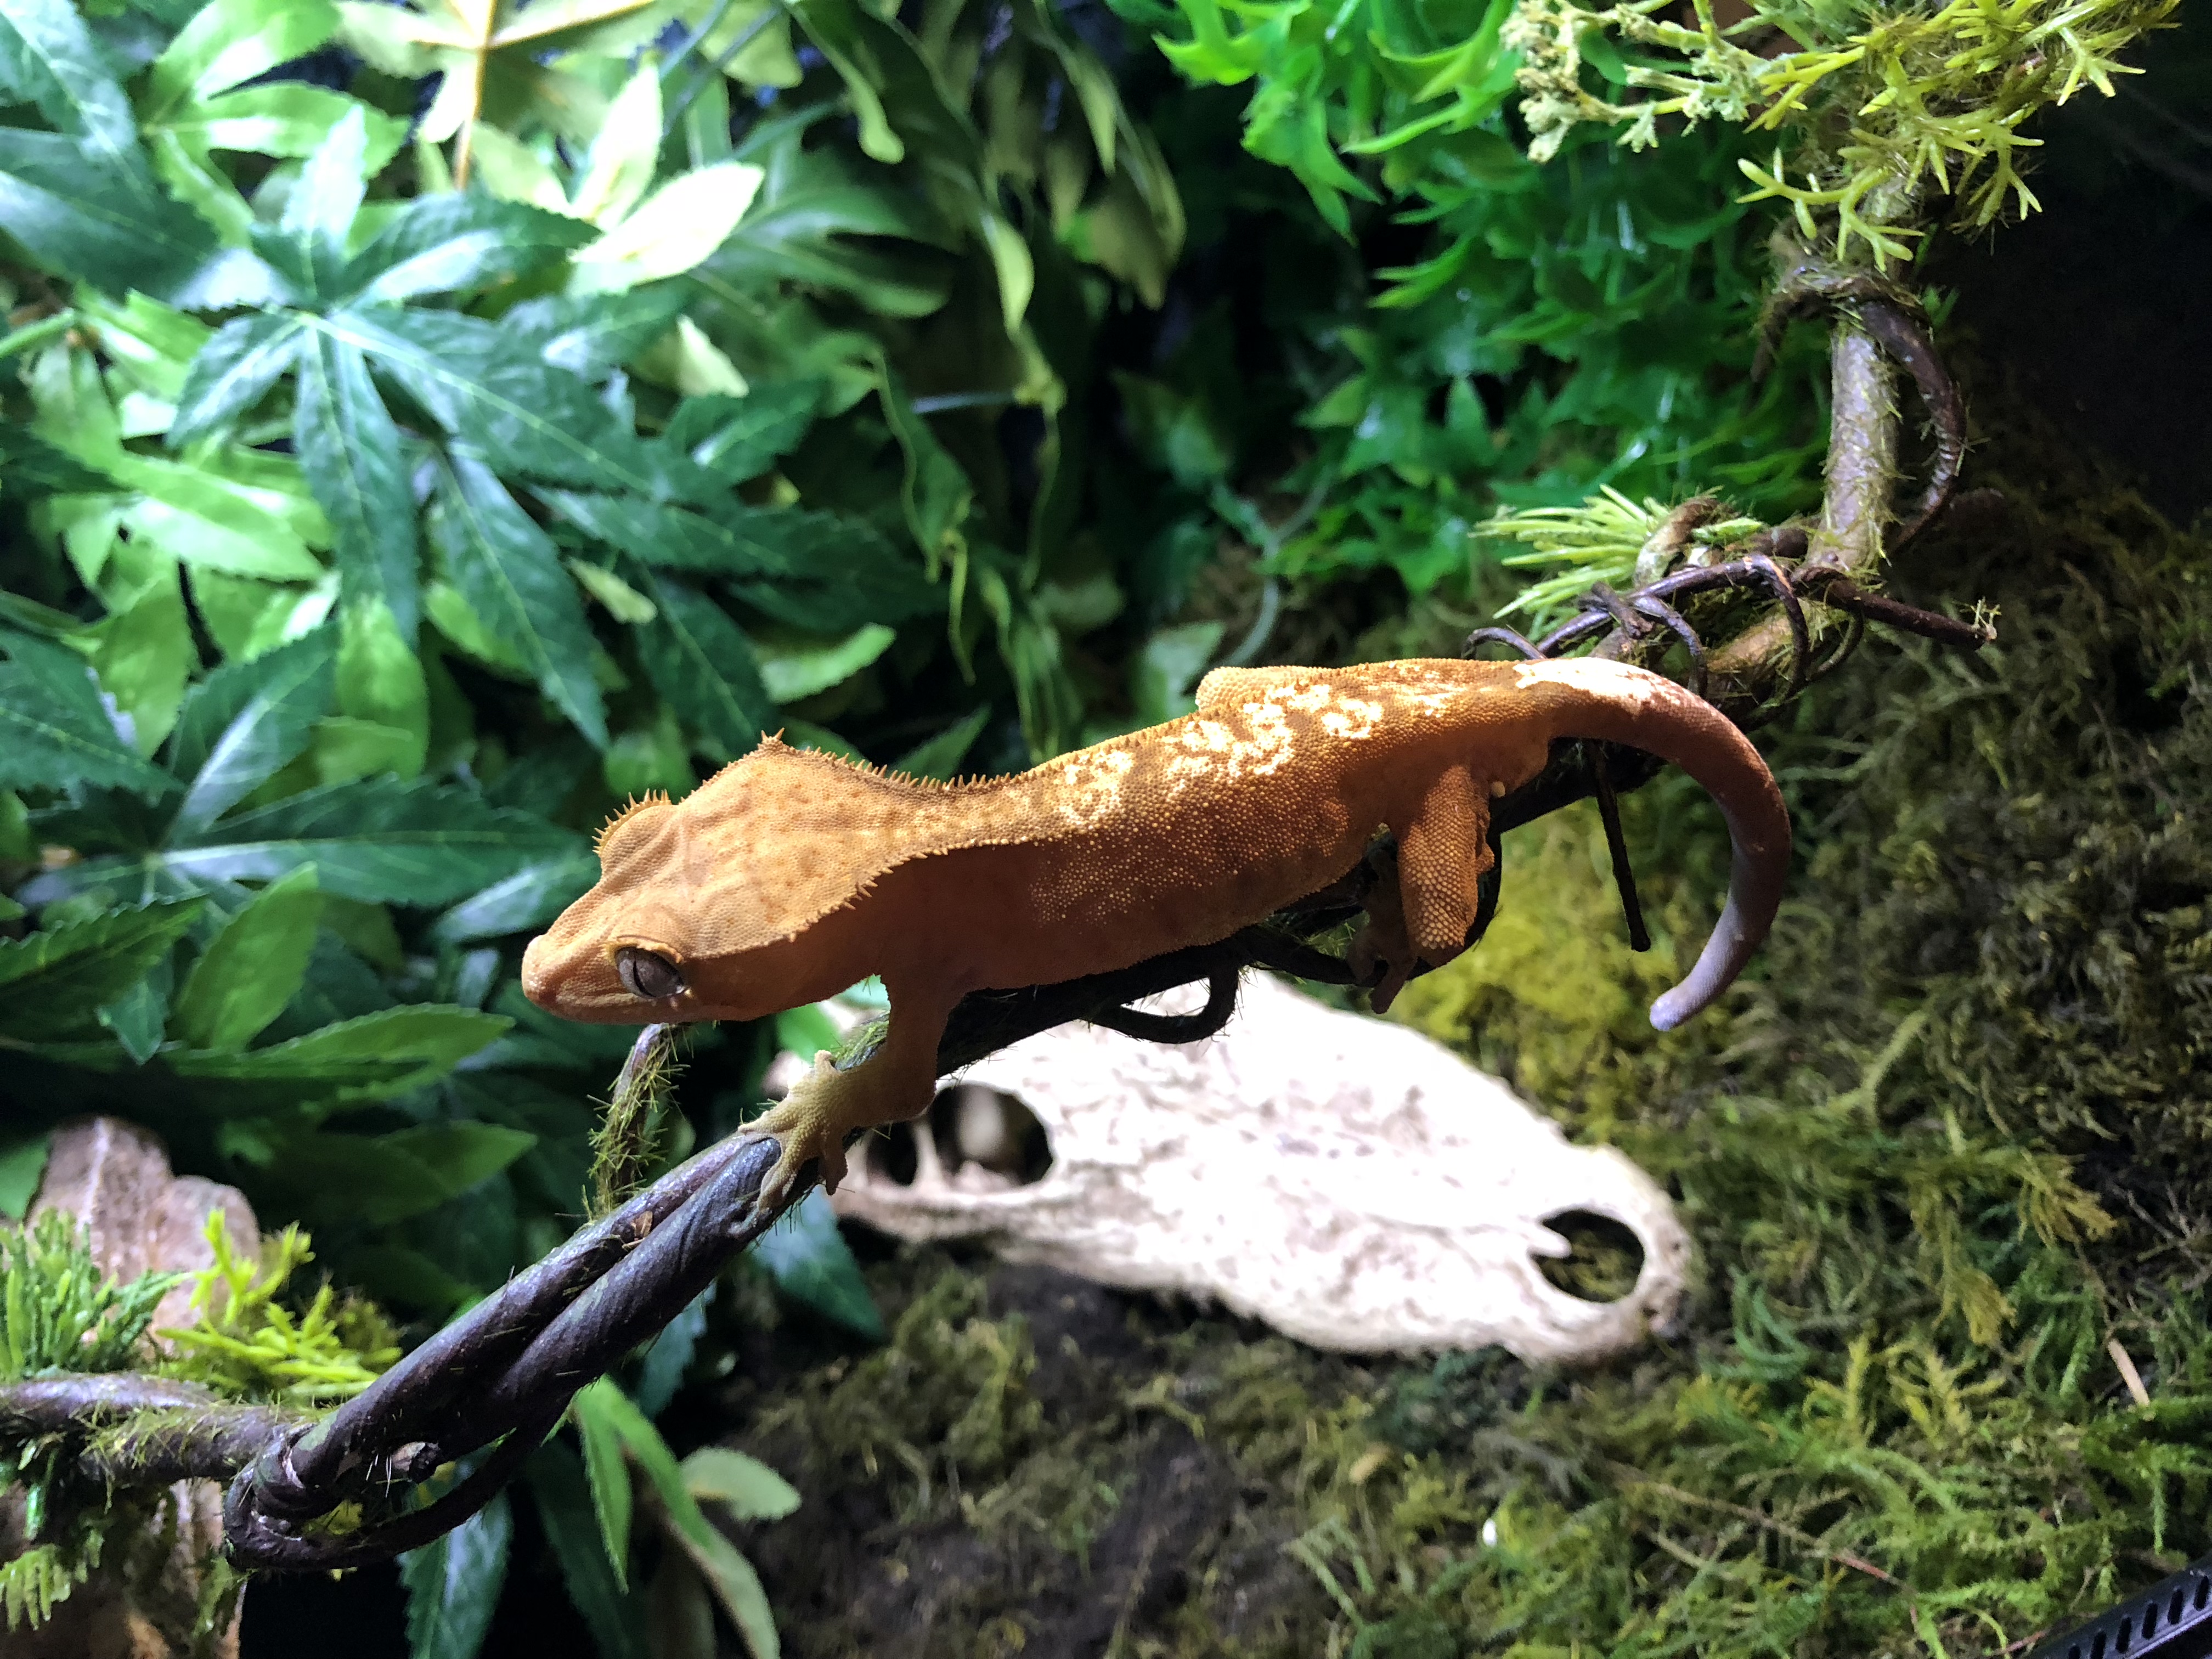 Flame Crested Gecko by Midnight Morphs